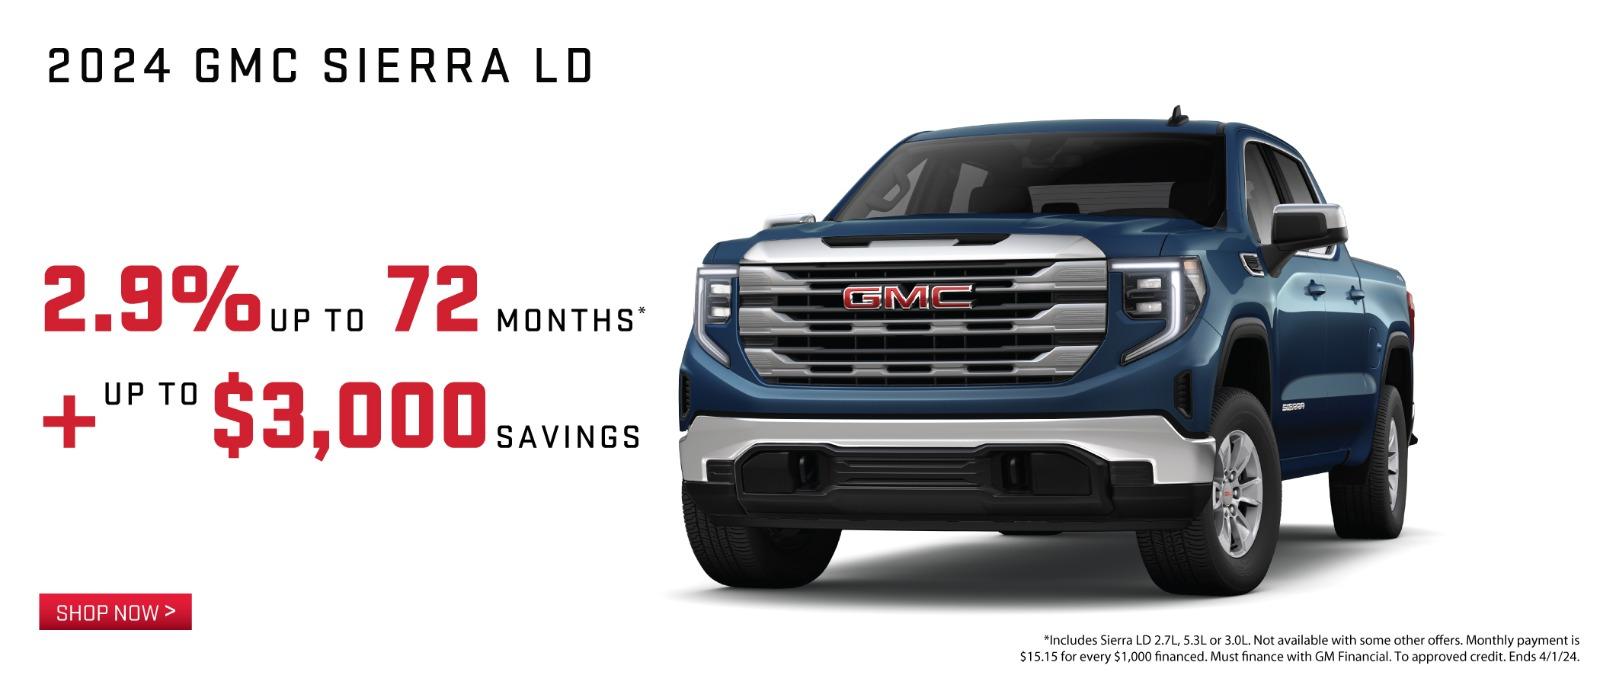 2024 GMC Sierra 1500 2.9& up to 72 months plus up to $3,000 savings